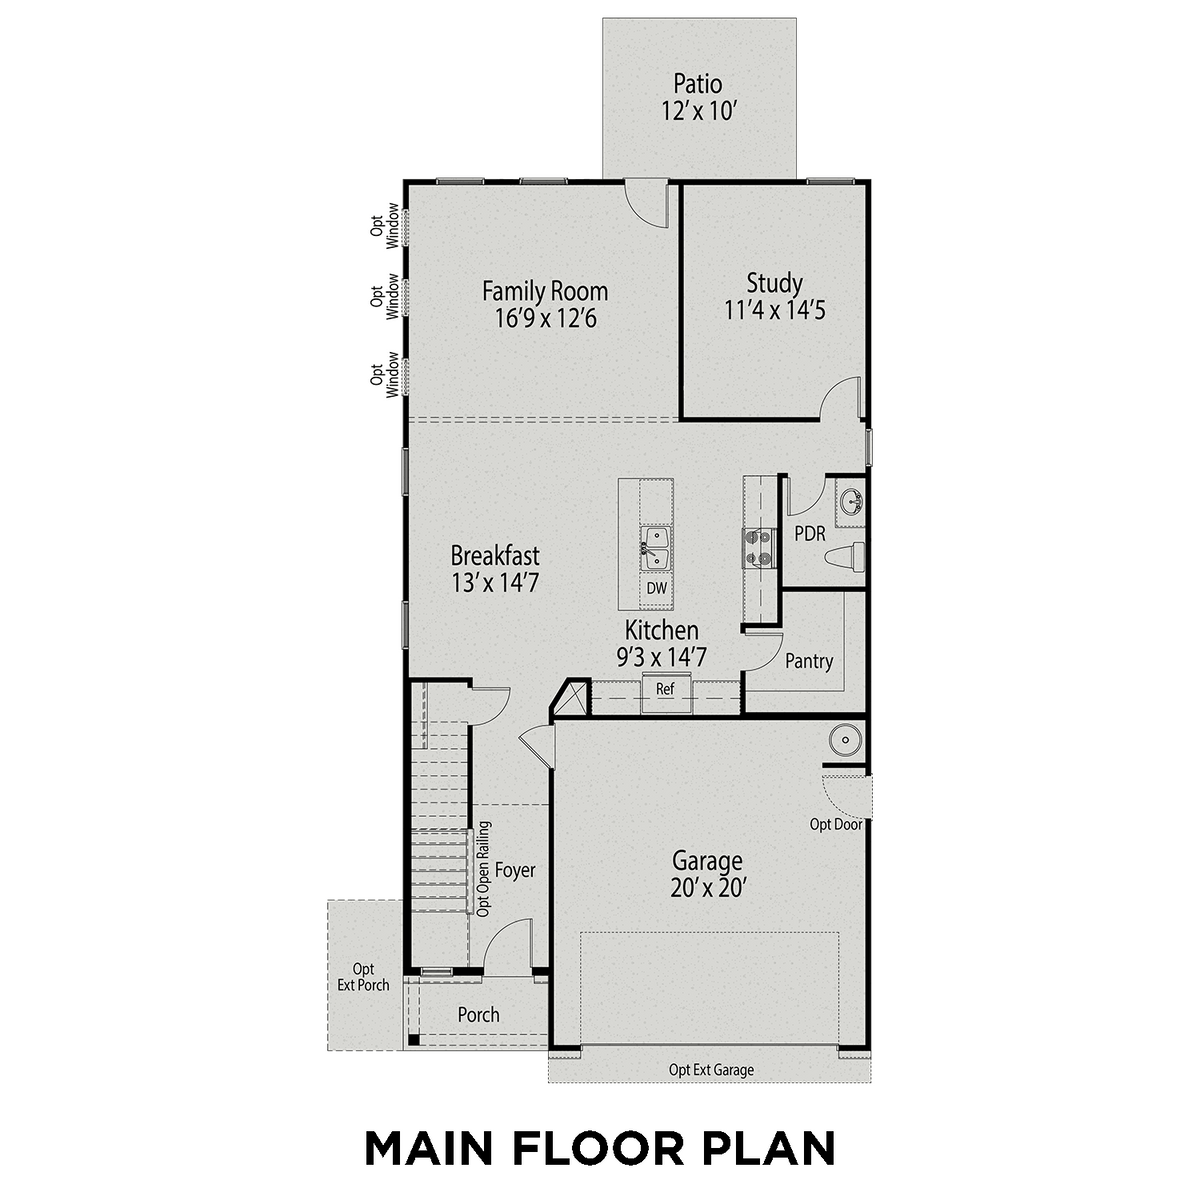 1 - The Adalynn A buildable floor plan layout in Davidson Homes' Wellers Knoll community.